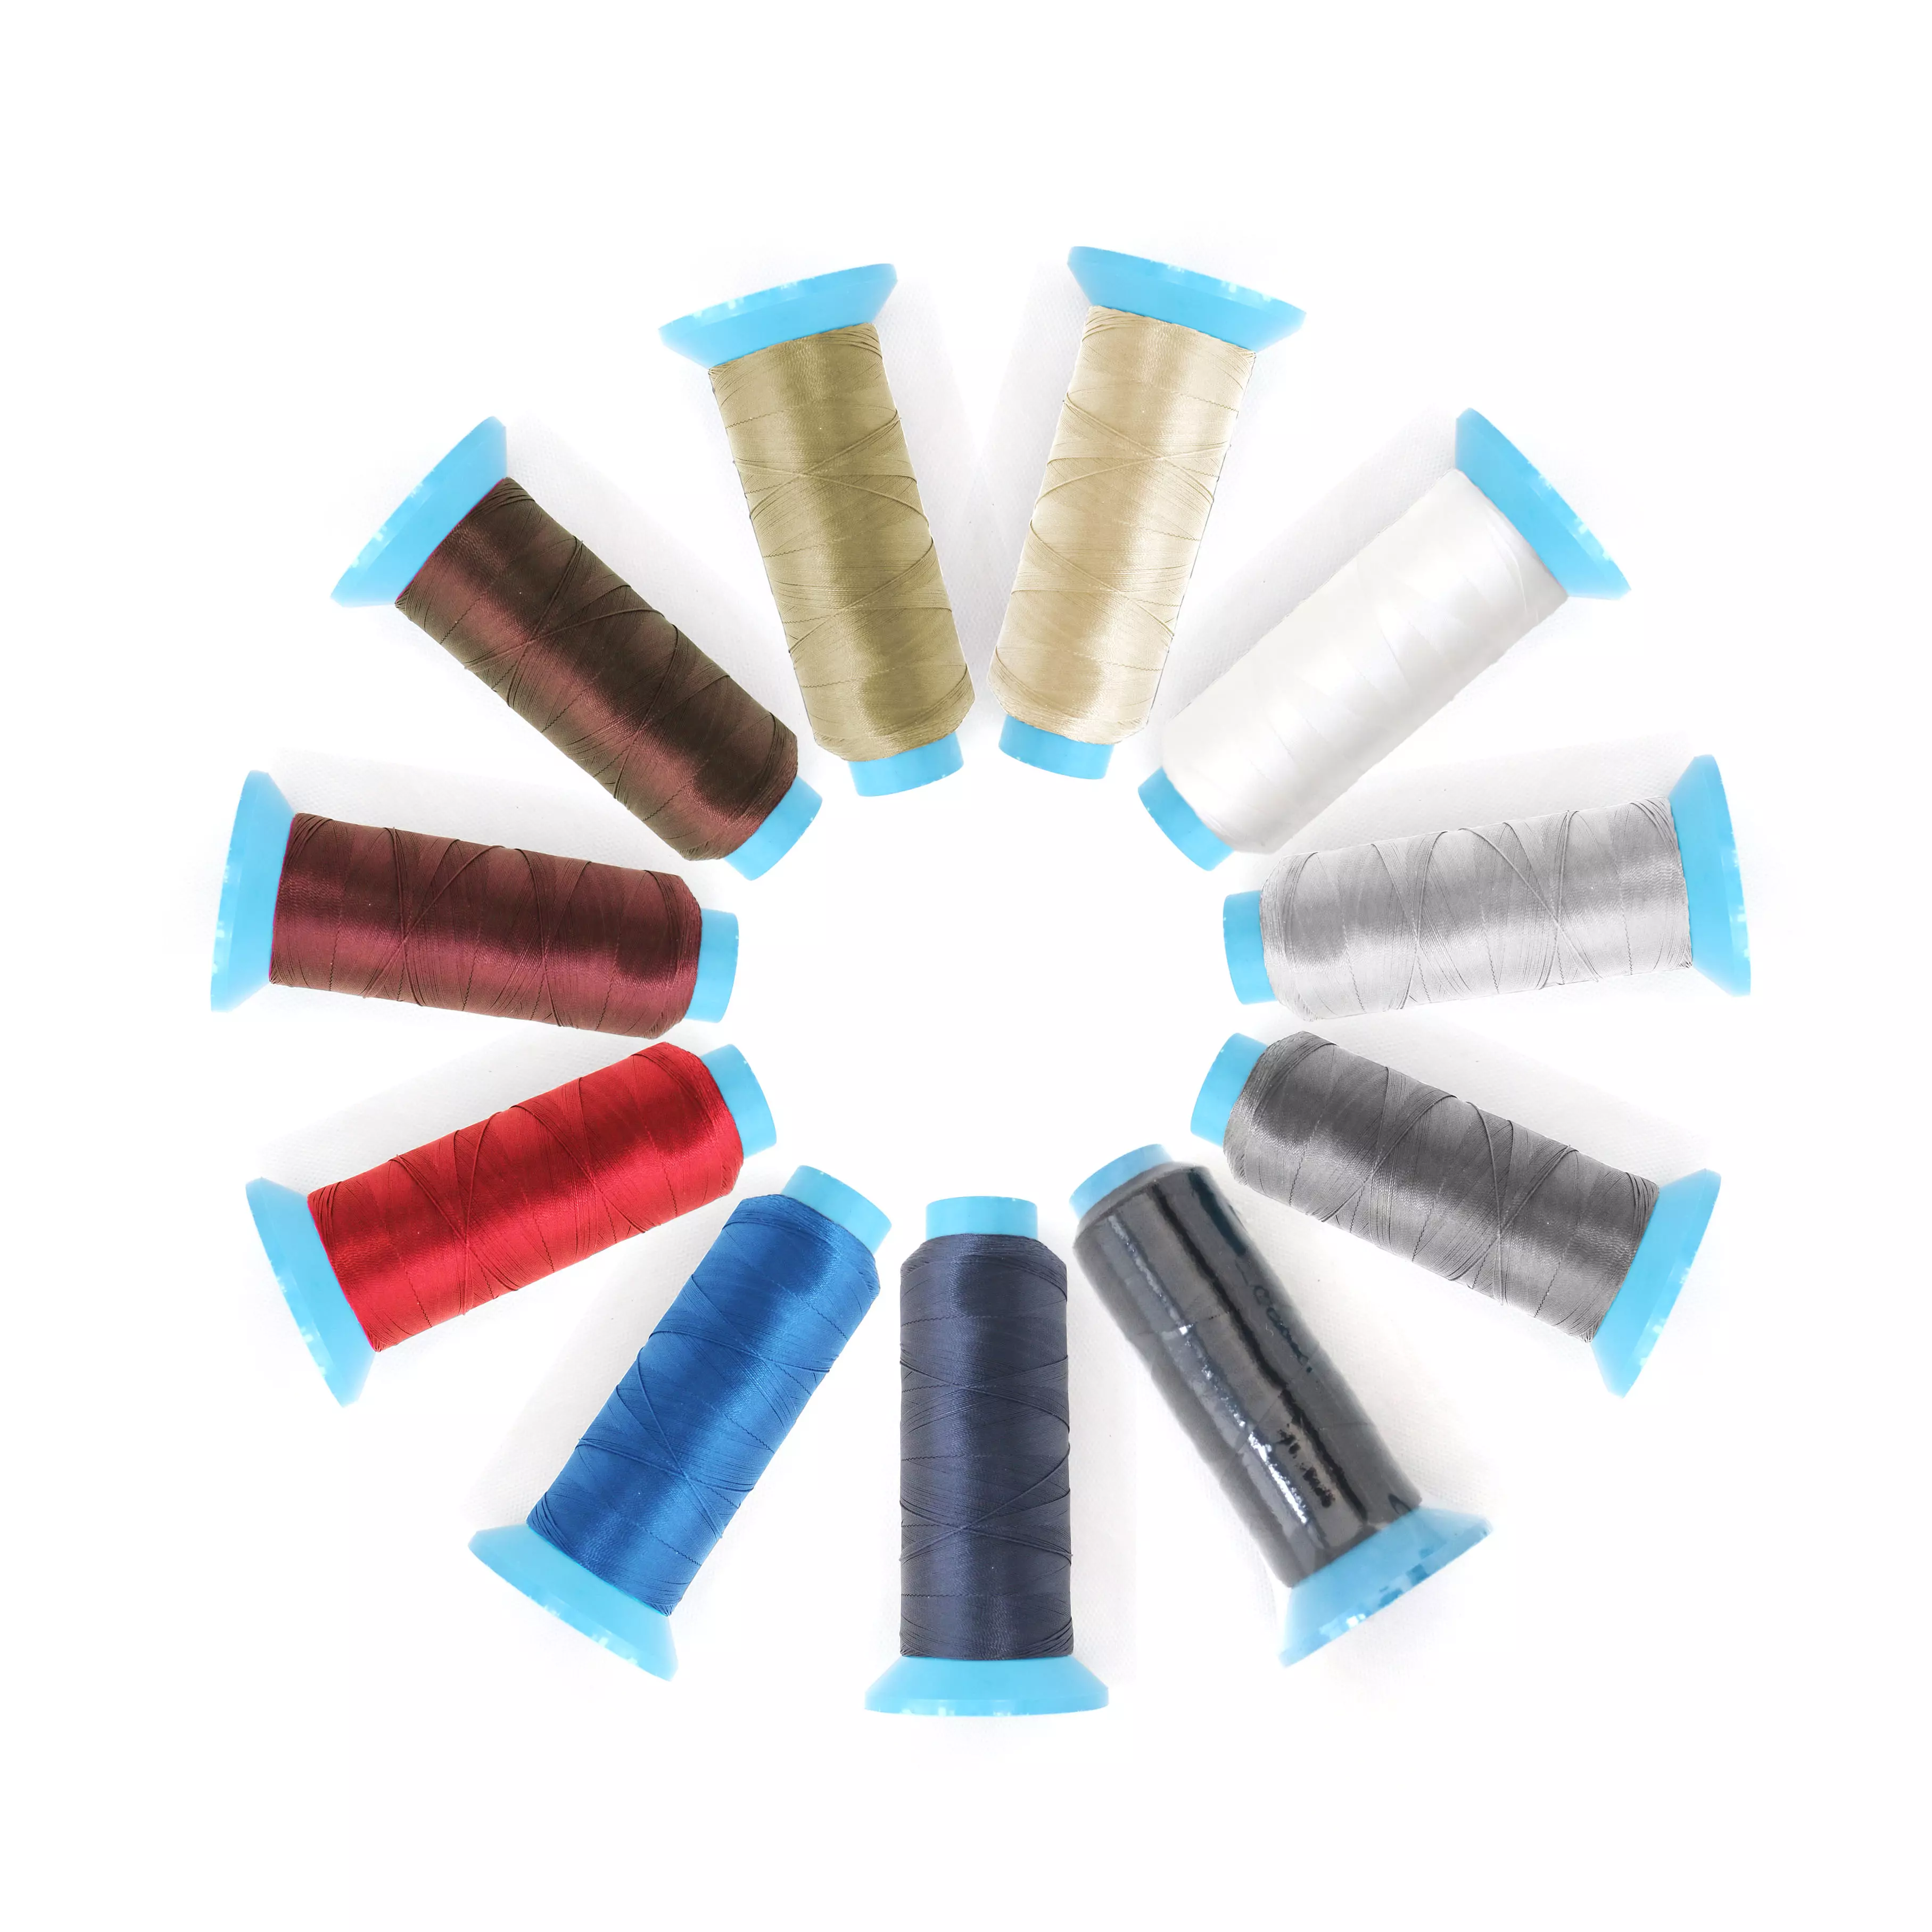 Gray Upholstery Thread Heavy Duty Sewing Thread Sewing Supplies Nylon  Thread for Sewing Leather Upholstery Tools Upholstery Notions 